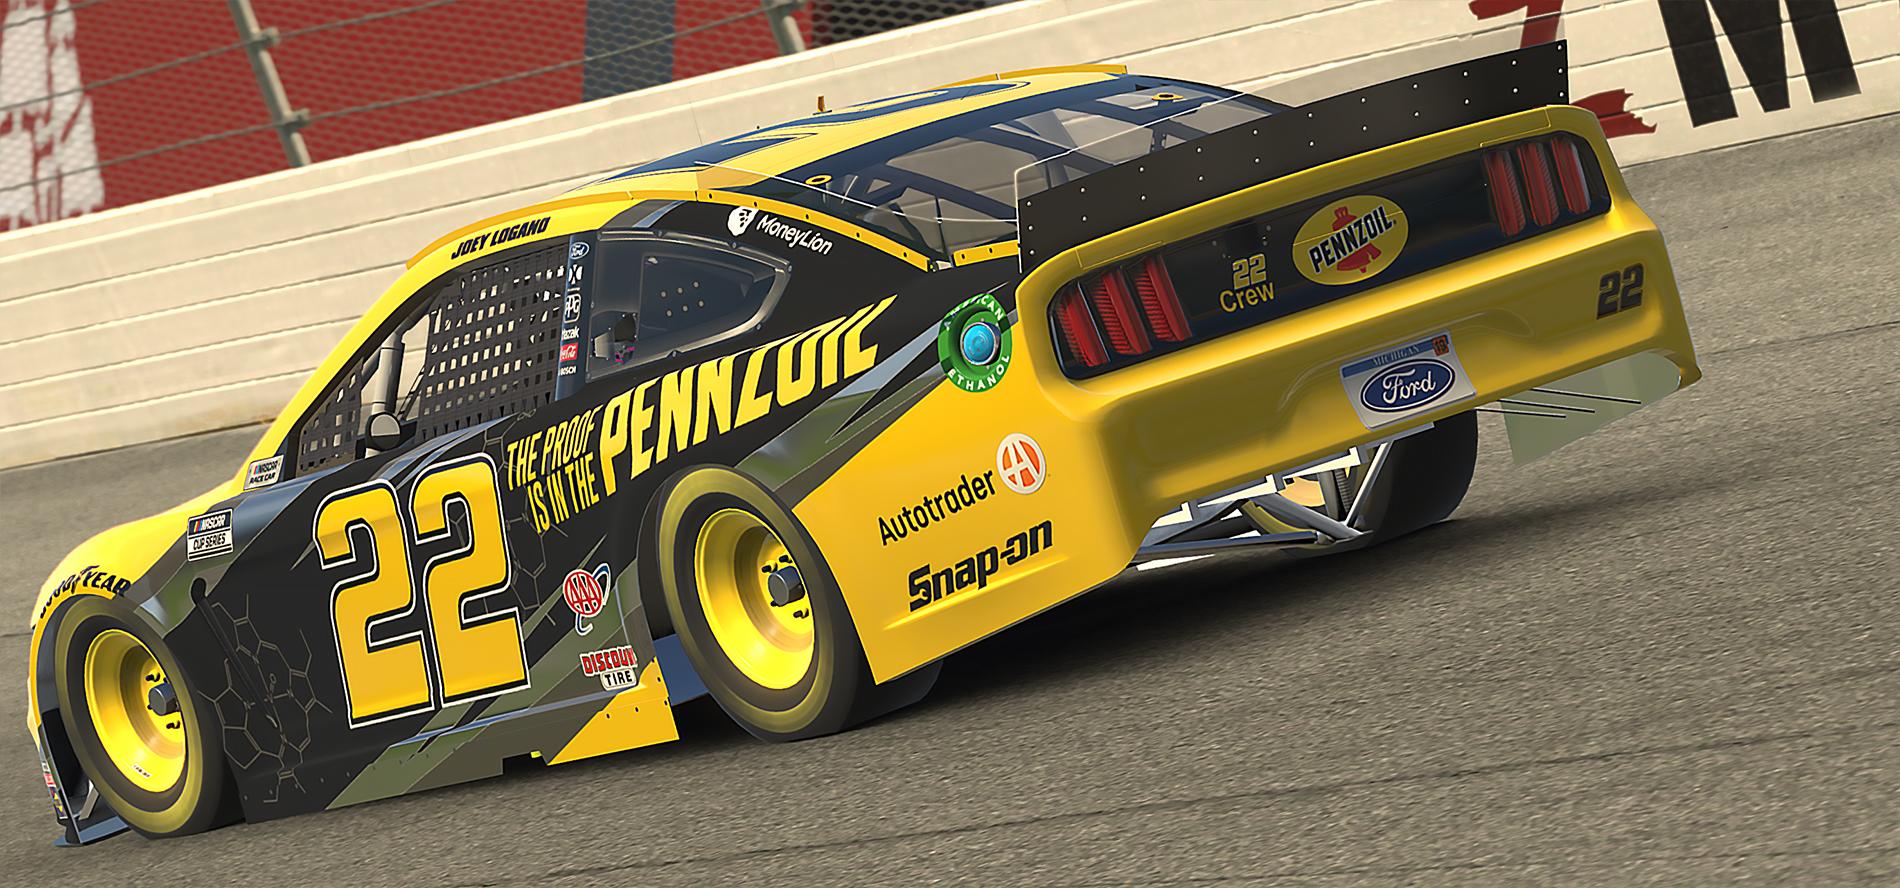 Preview of Fictional #22 Joey Logano Pennzoil Mustang by David Baker